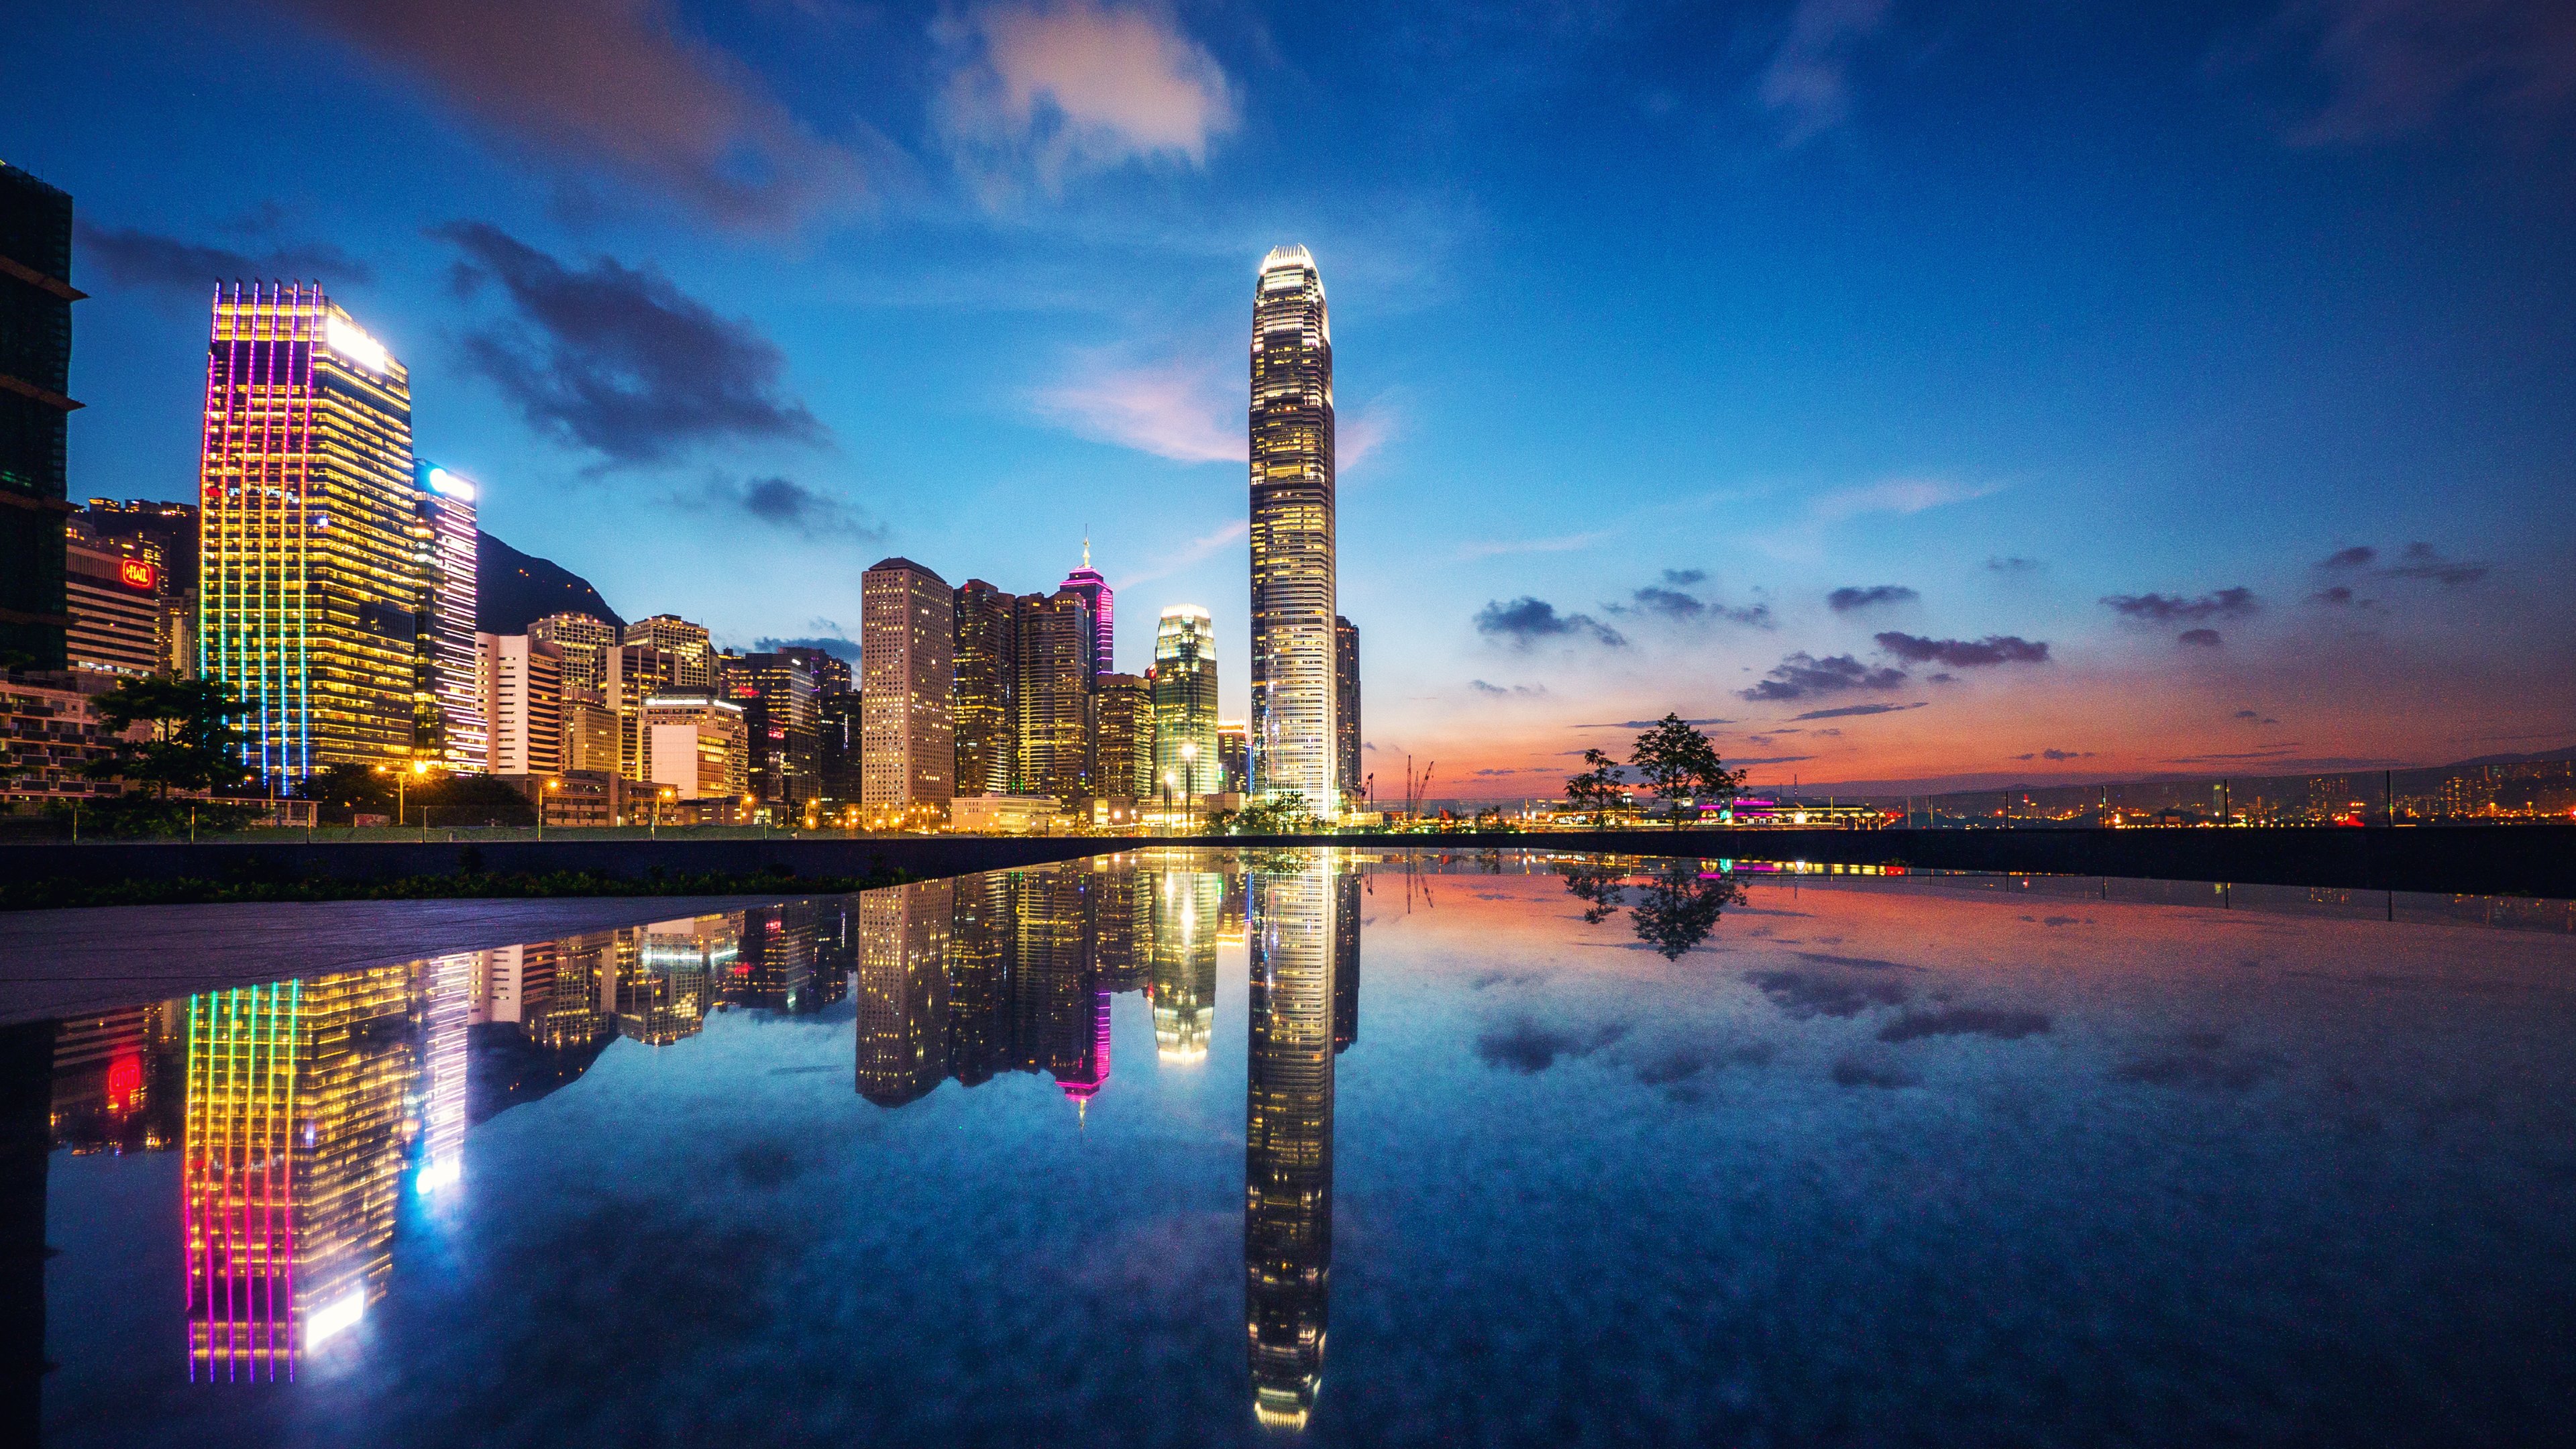 man made, architecture, cities, hong kong, reflection, building, cityscape, twilight High Definition image